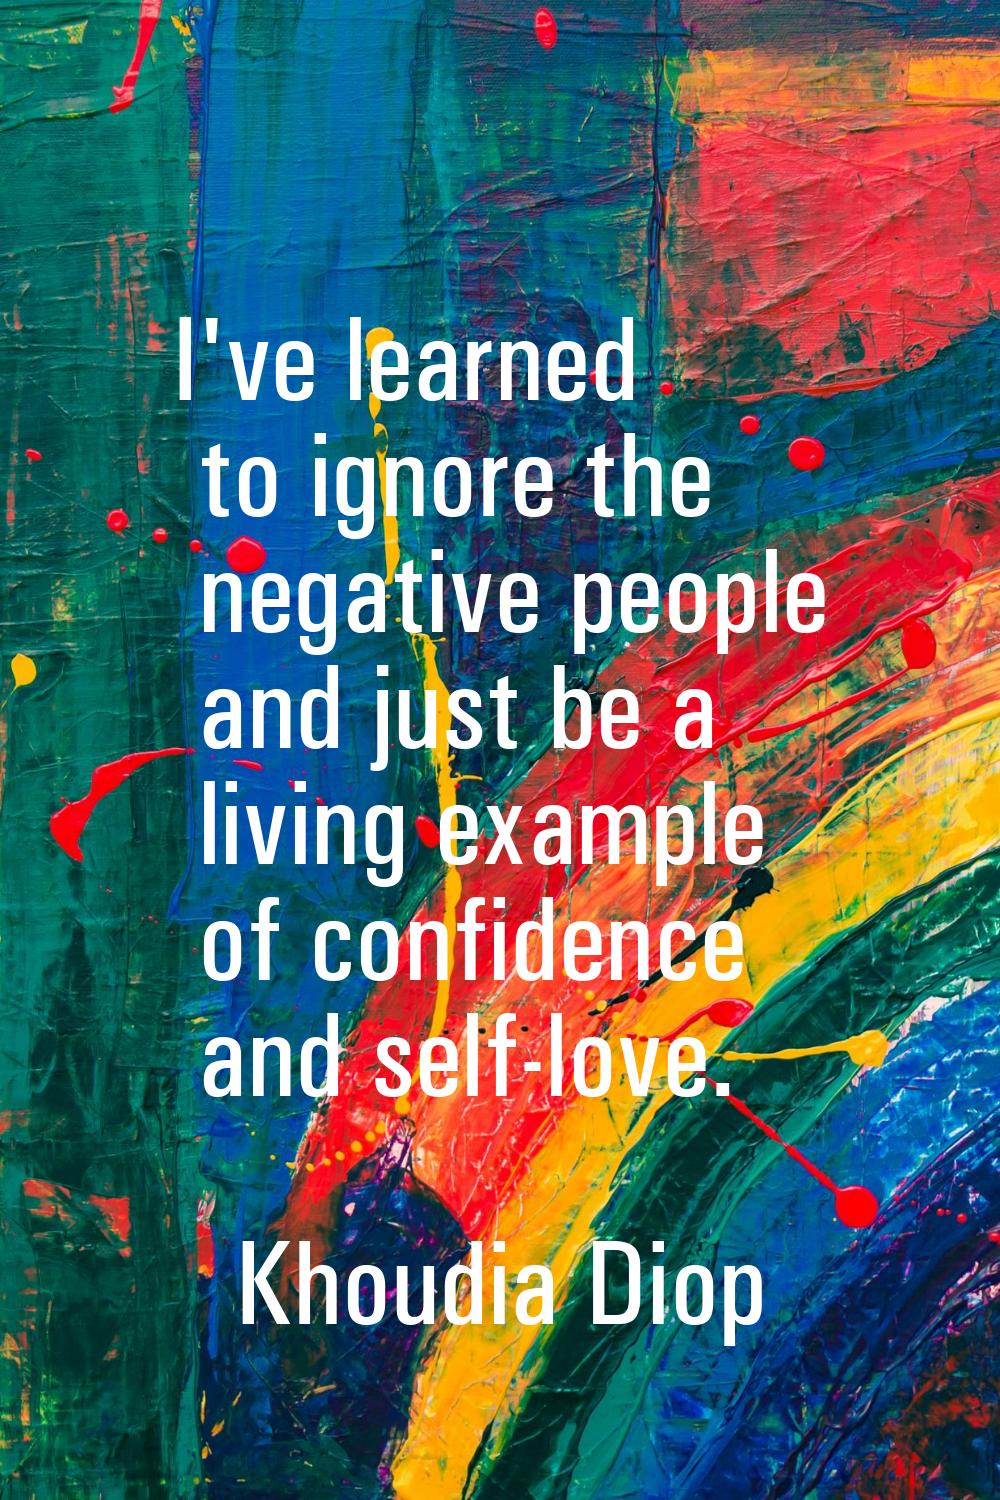 I've learned to ignore the negative people and just be a living example of confidence and self-love